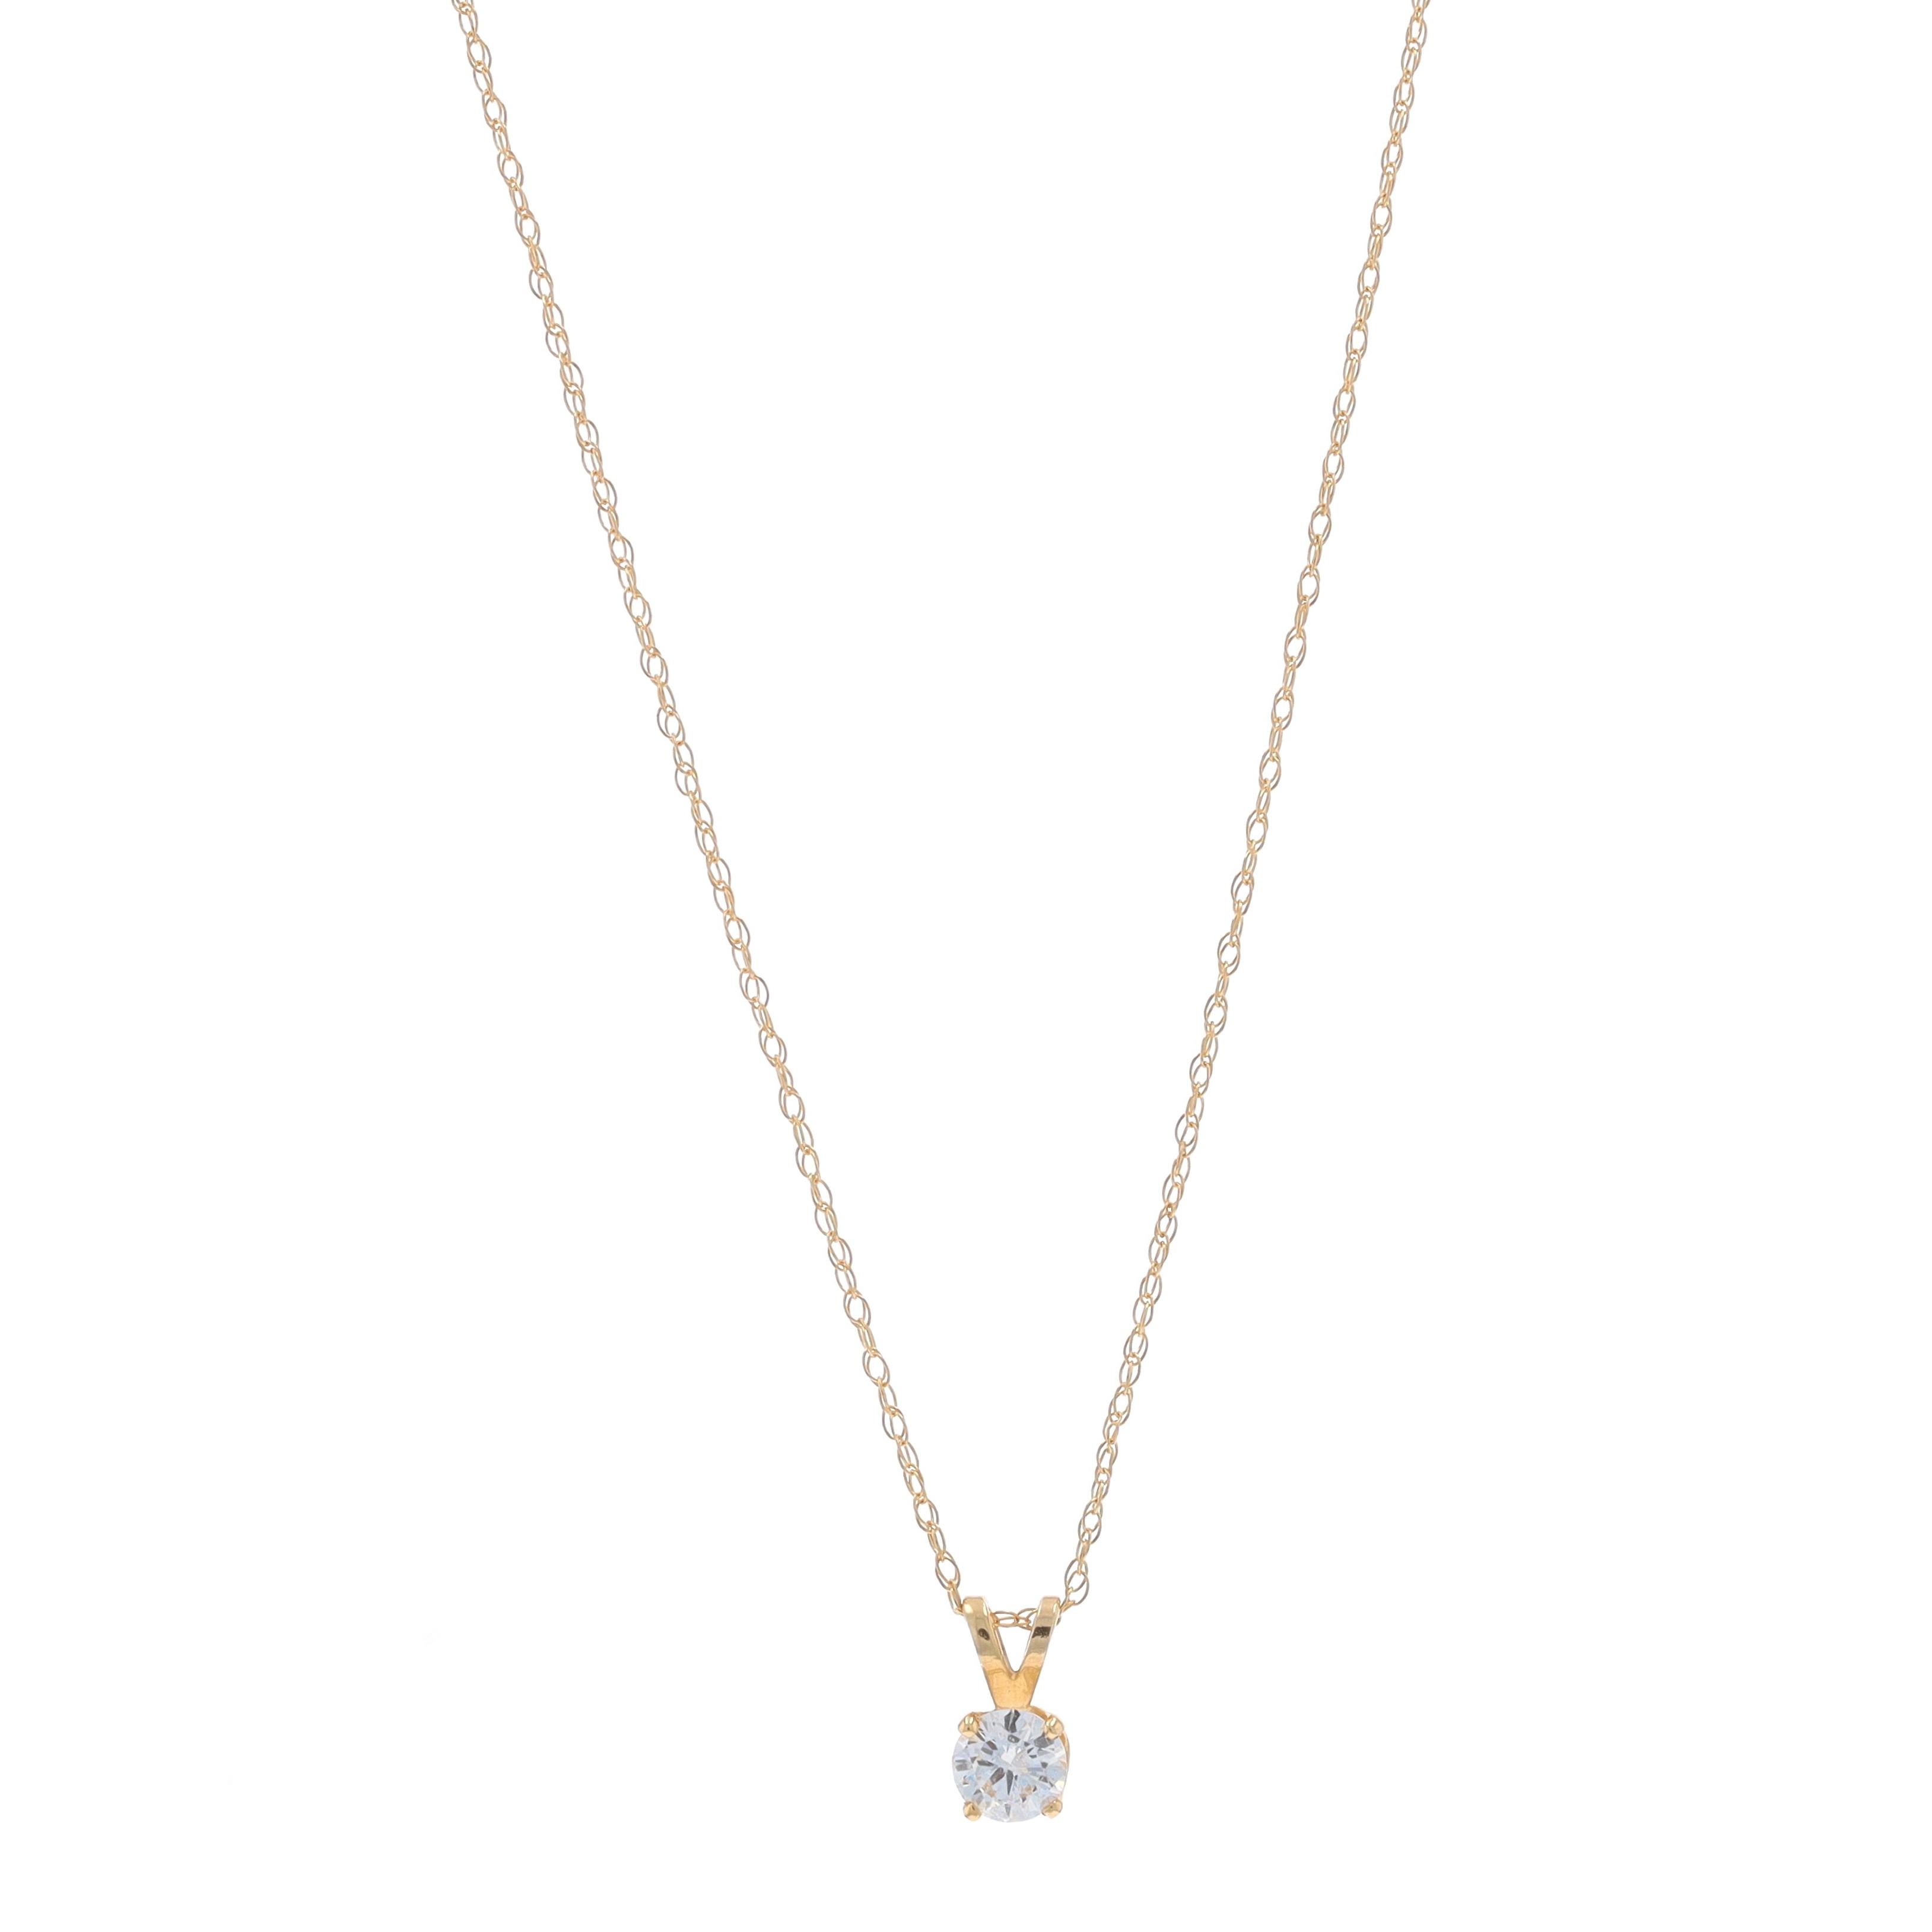 Metal Content: 14k Yellow Gold

Stone Information

Natural Diamond
Carat(s): .33ct
Cut: Round Brilliant
Color: I
Clarity: SI2

Total Carats: .33ct

Style: Solitaire
Chain Style: Prince of Wales
Necklace Style: Chain
Fastening Type: Spring Ring